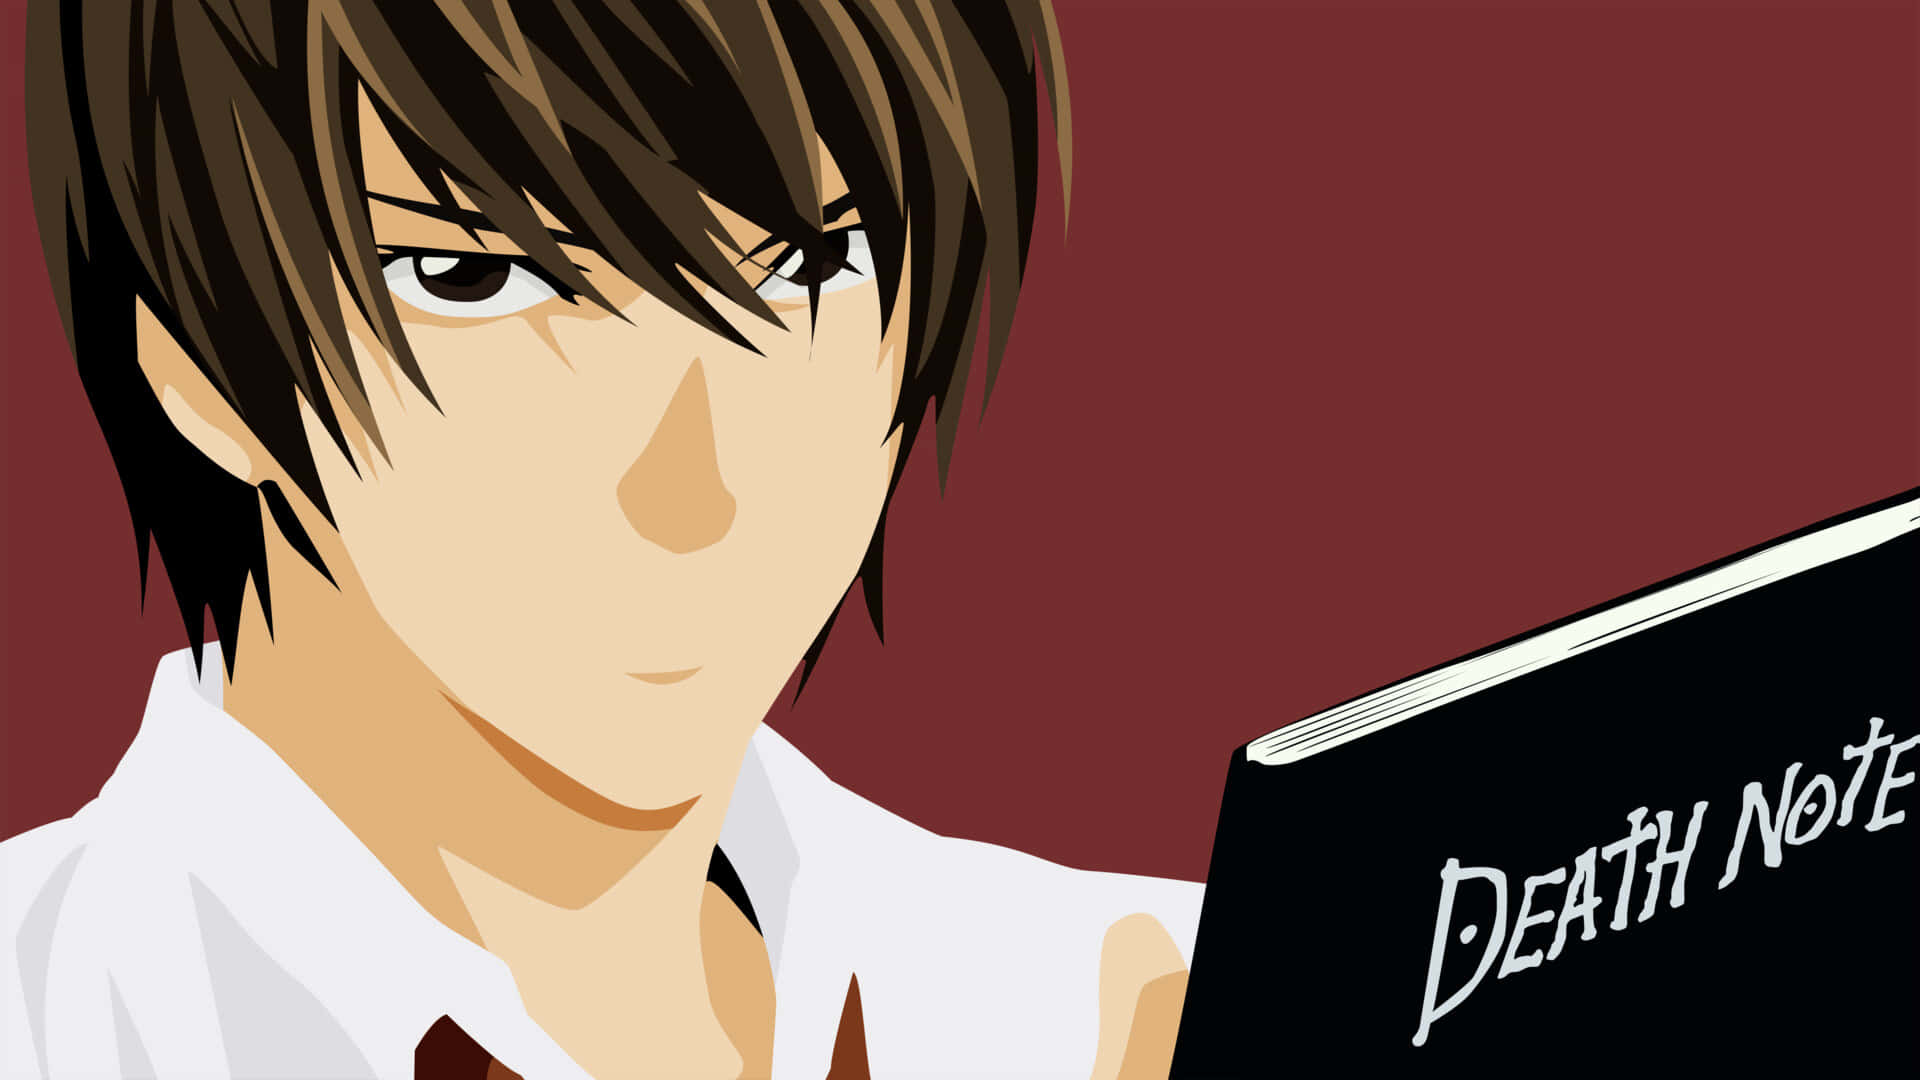 Light Yagami, following his destiny as the God of the new world